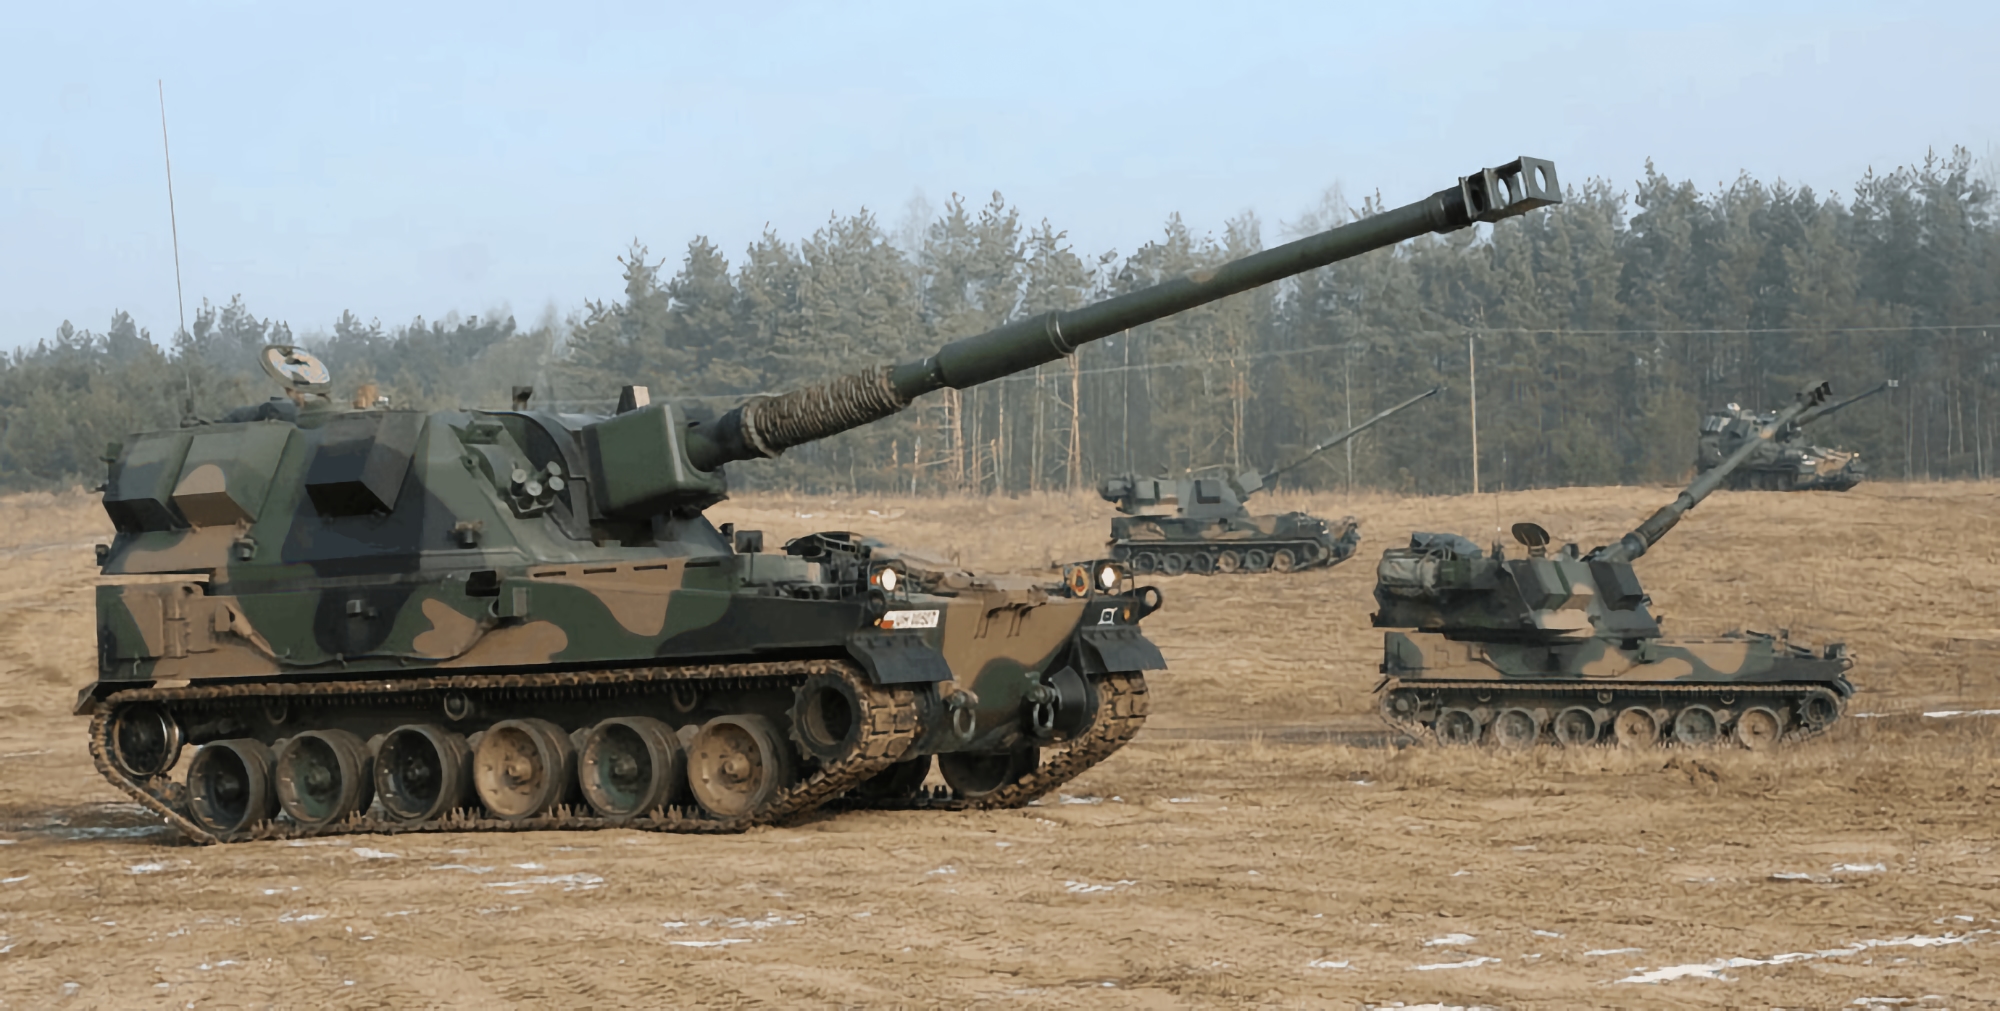 AFU uses Krab SAU with modern 155-mm shells, which can shoot up to 31 km